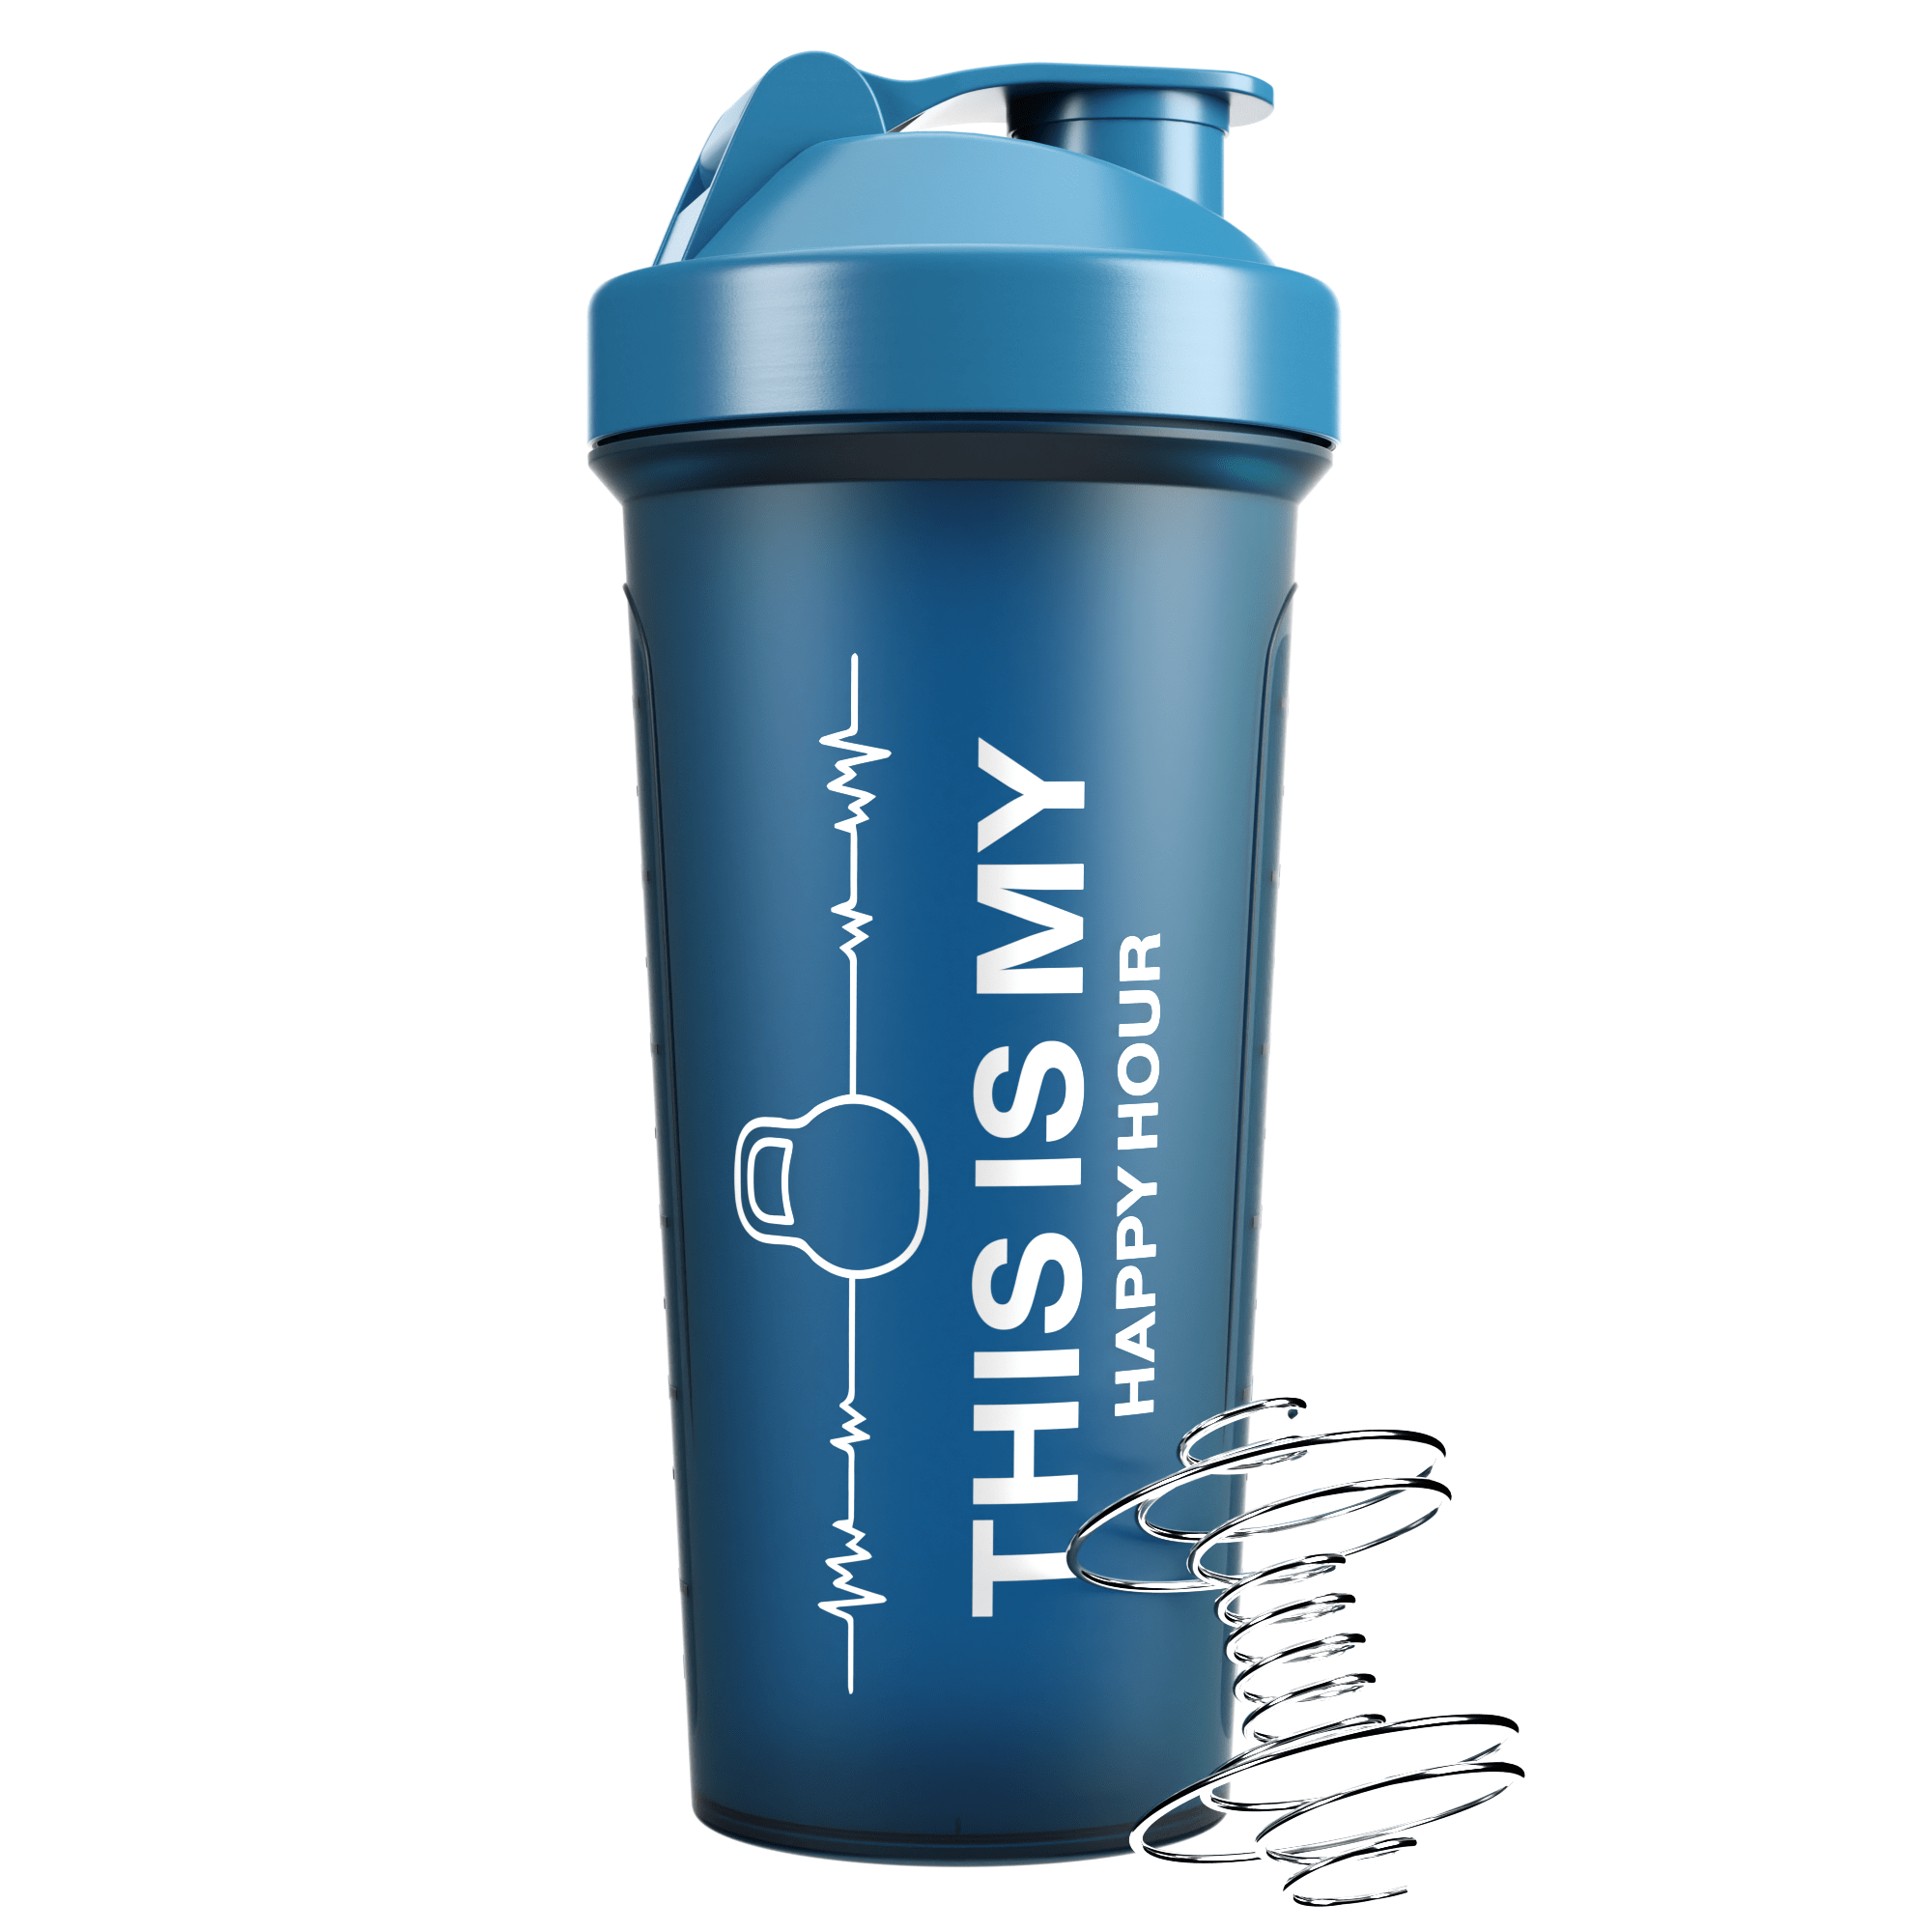 GOMOYO Shaker Bottle with Motivational Quotes | 27 Ounce Protein Shaker Cup  with Mixer Net | Attacha…See more GOMOYO Shaker Bottle with Motivational